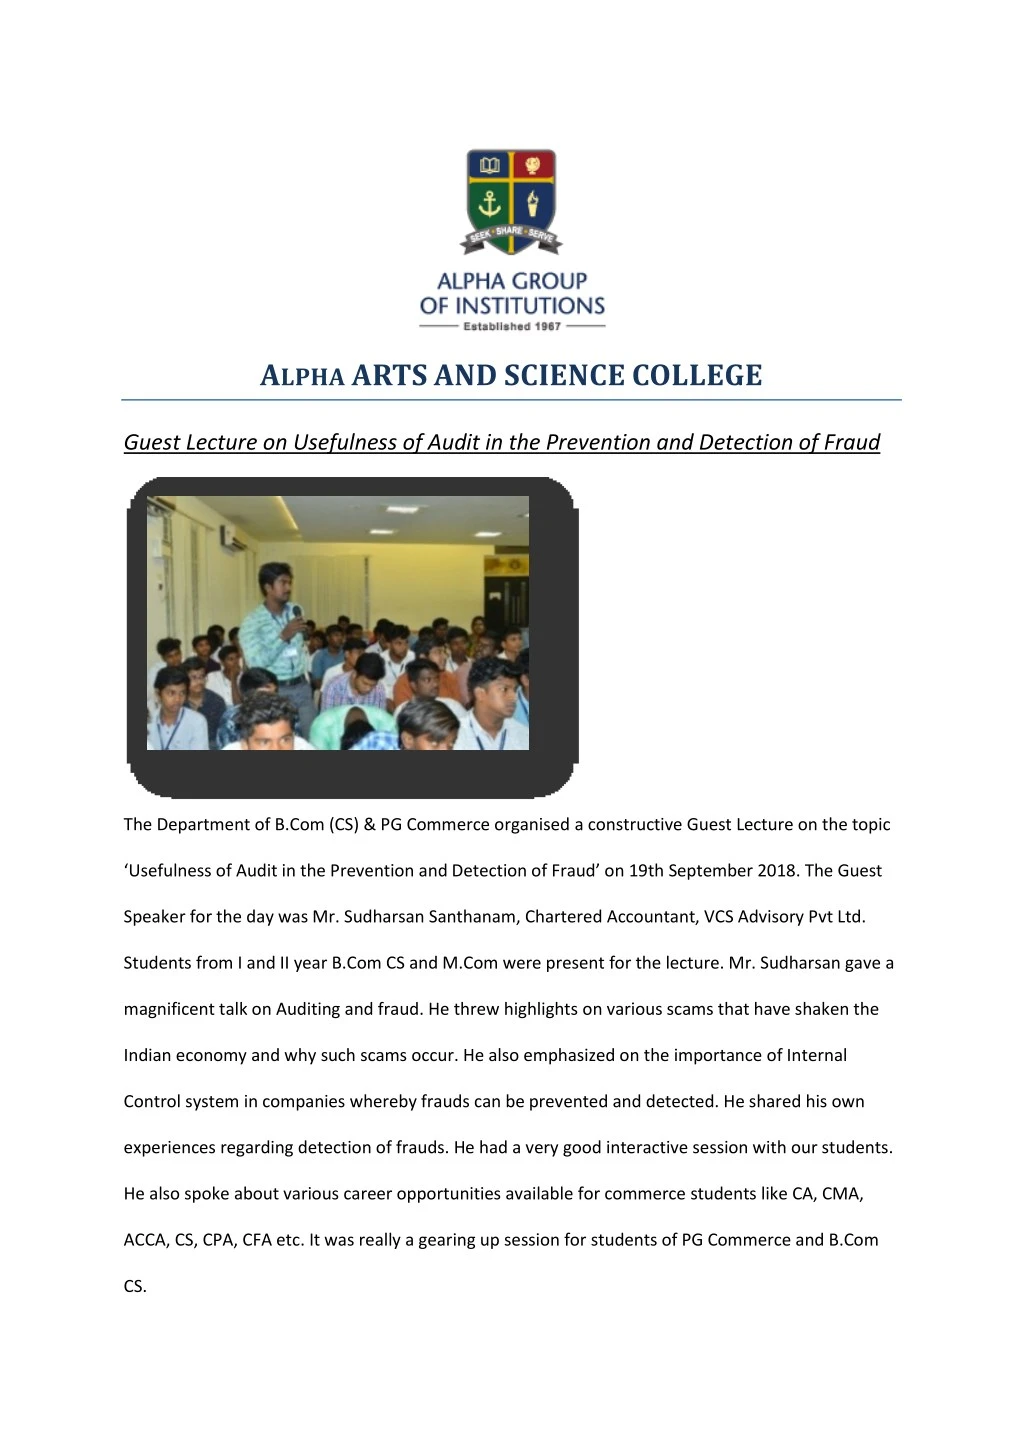 a lpha arts and science college